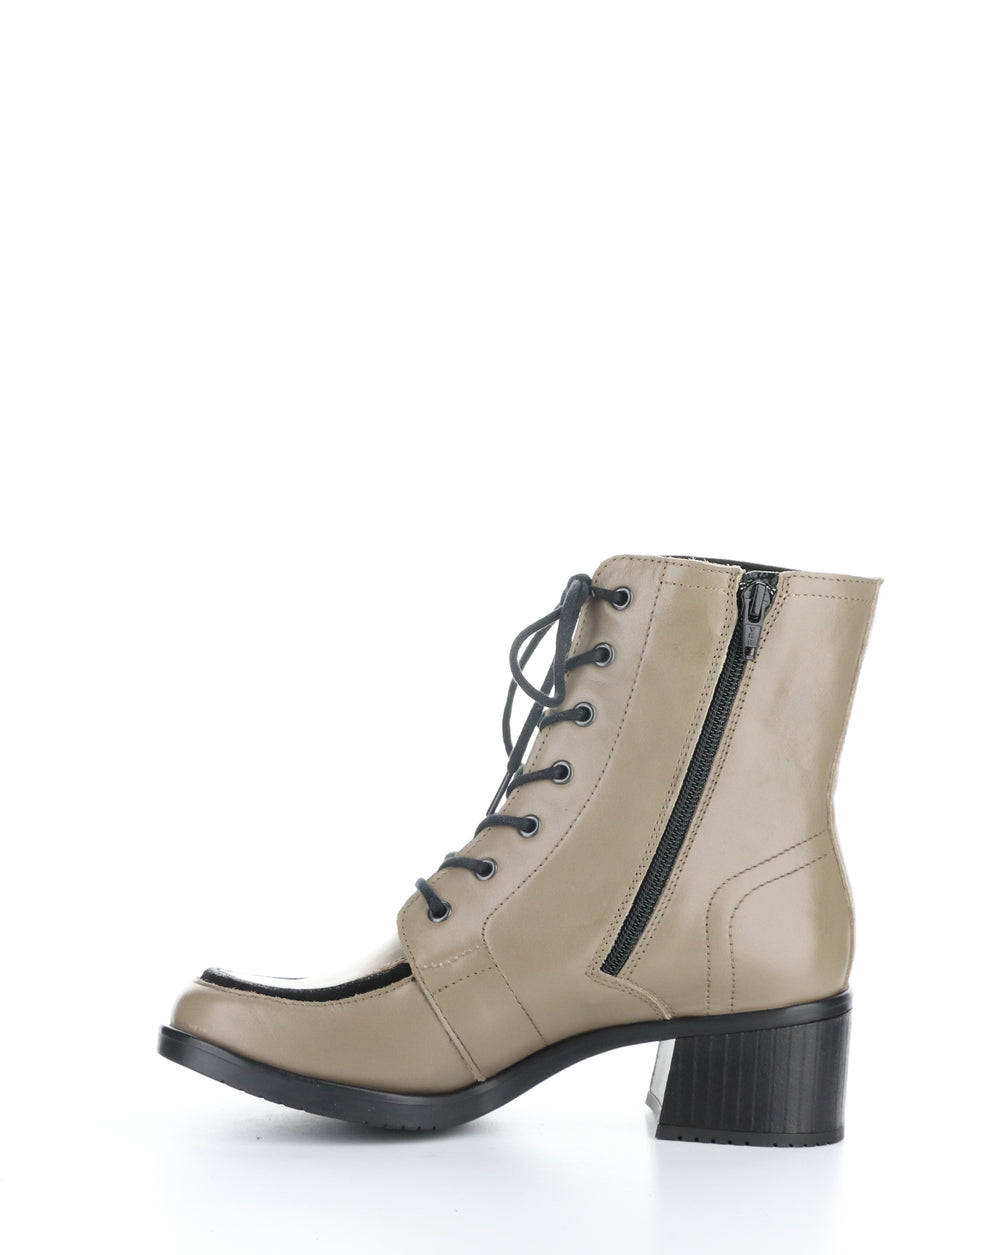 KASS017FLY 002 TAUPE/BLACK Round Toe Boots